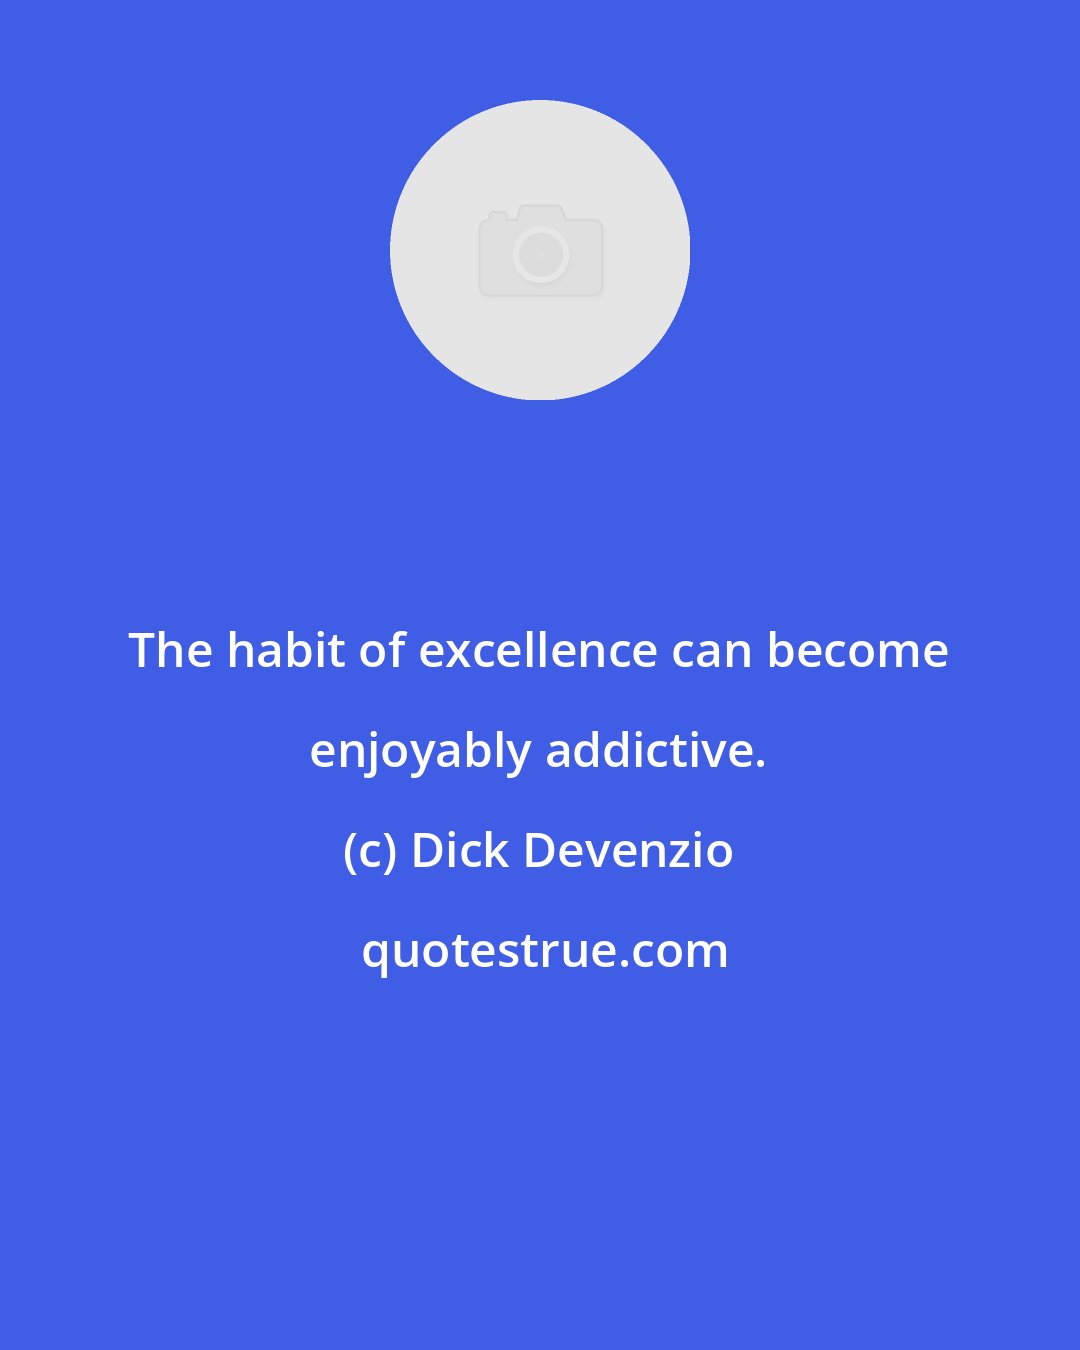 Dick Devenzio: The habit of excellence can become enjoyably addictive.